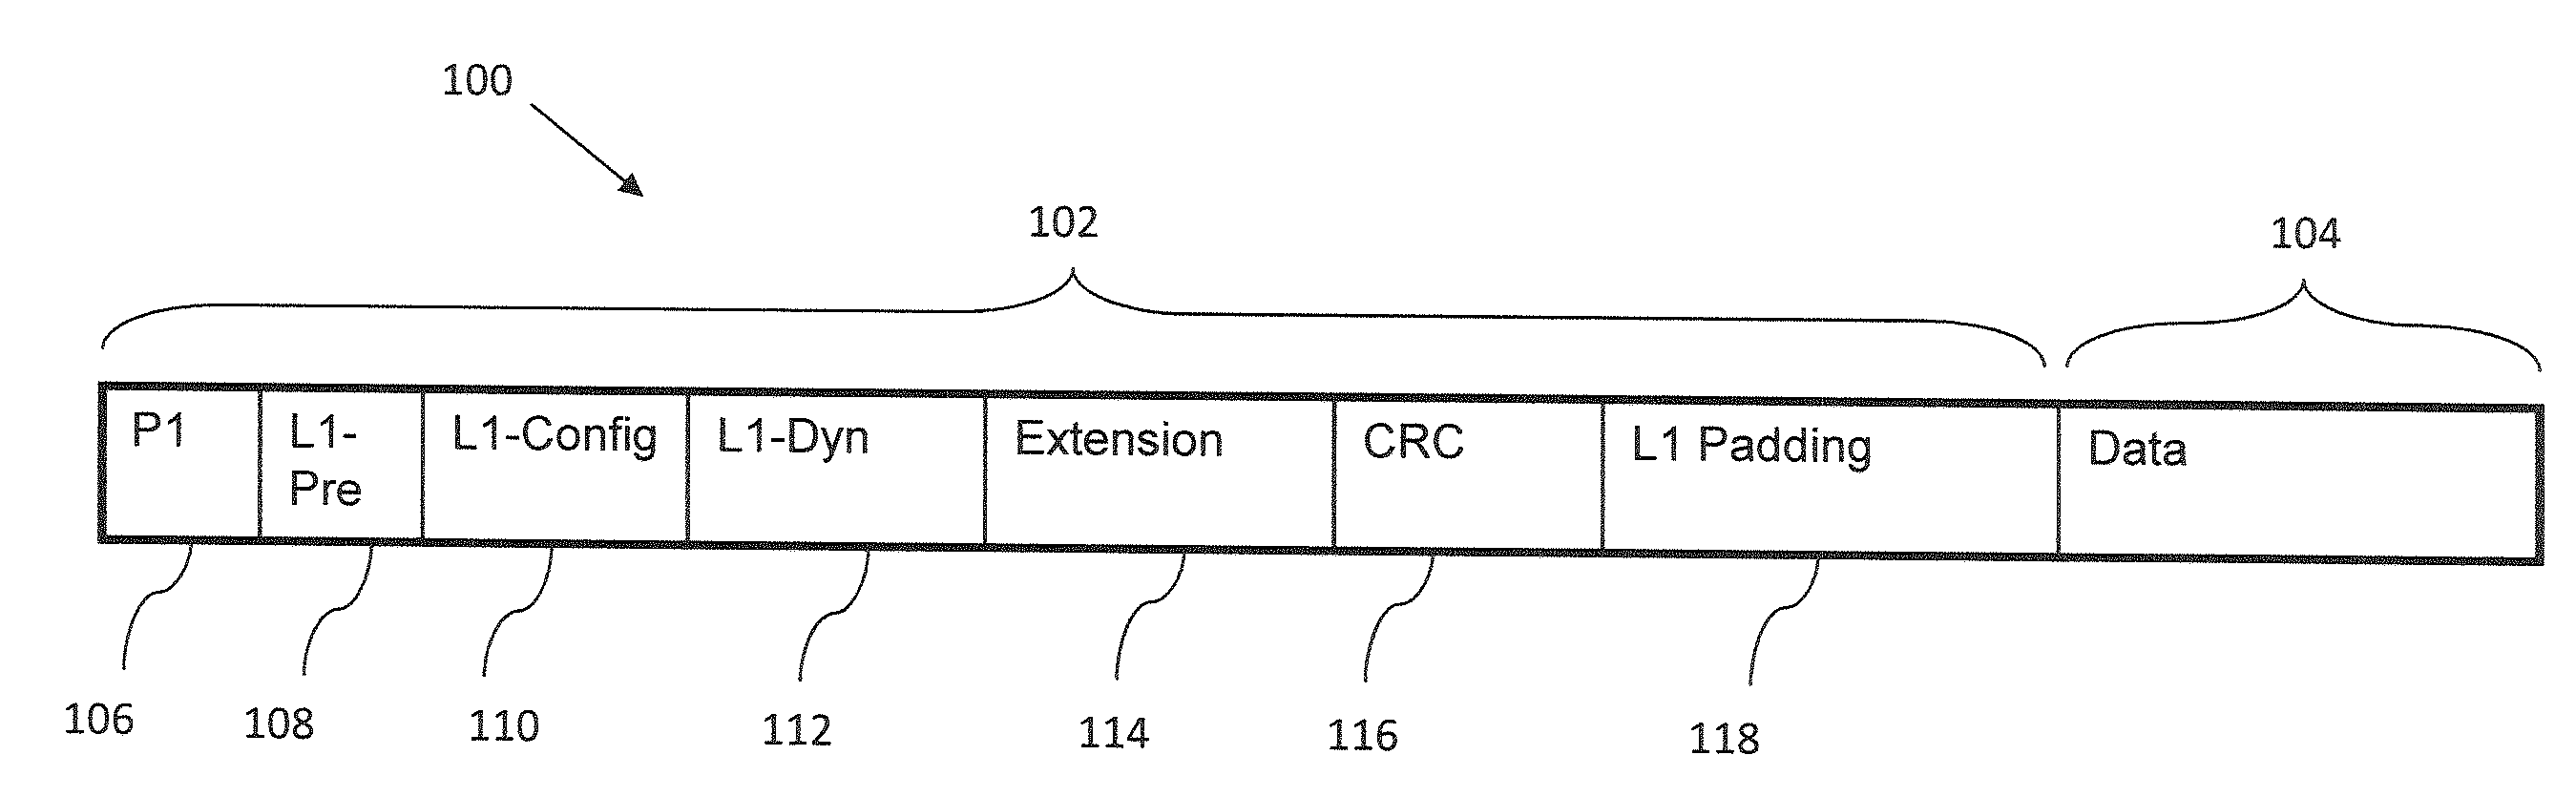 Frame structure of a wireless communication system, and method and apparatus for transmitting and receiving a plurality of data streams through the frame structure